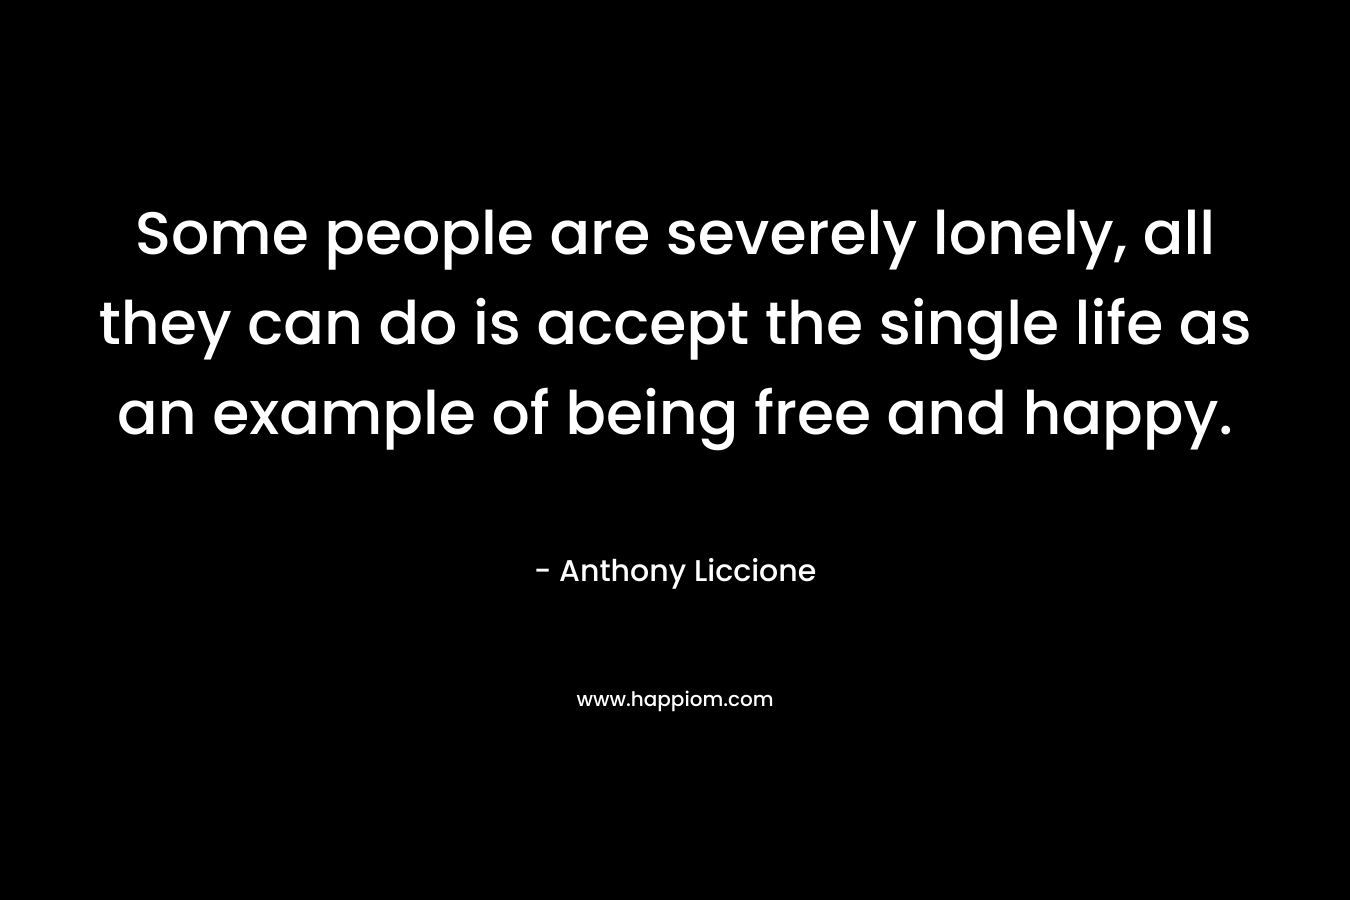 Some people are severely lonely, all they can do is accept the single life as an example of being free and happy.